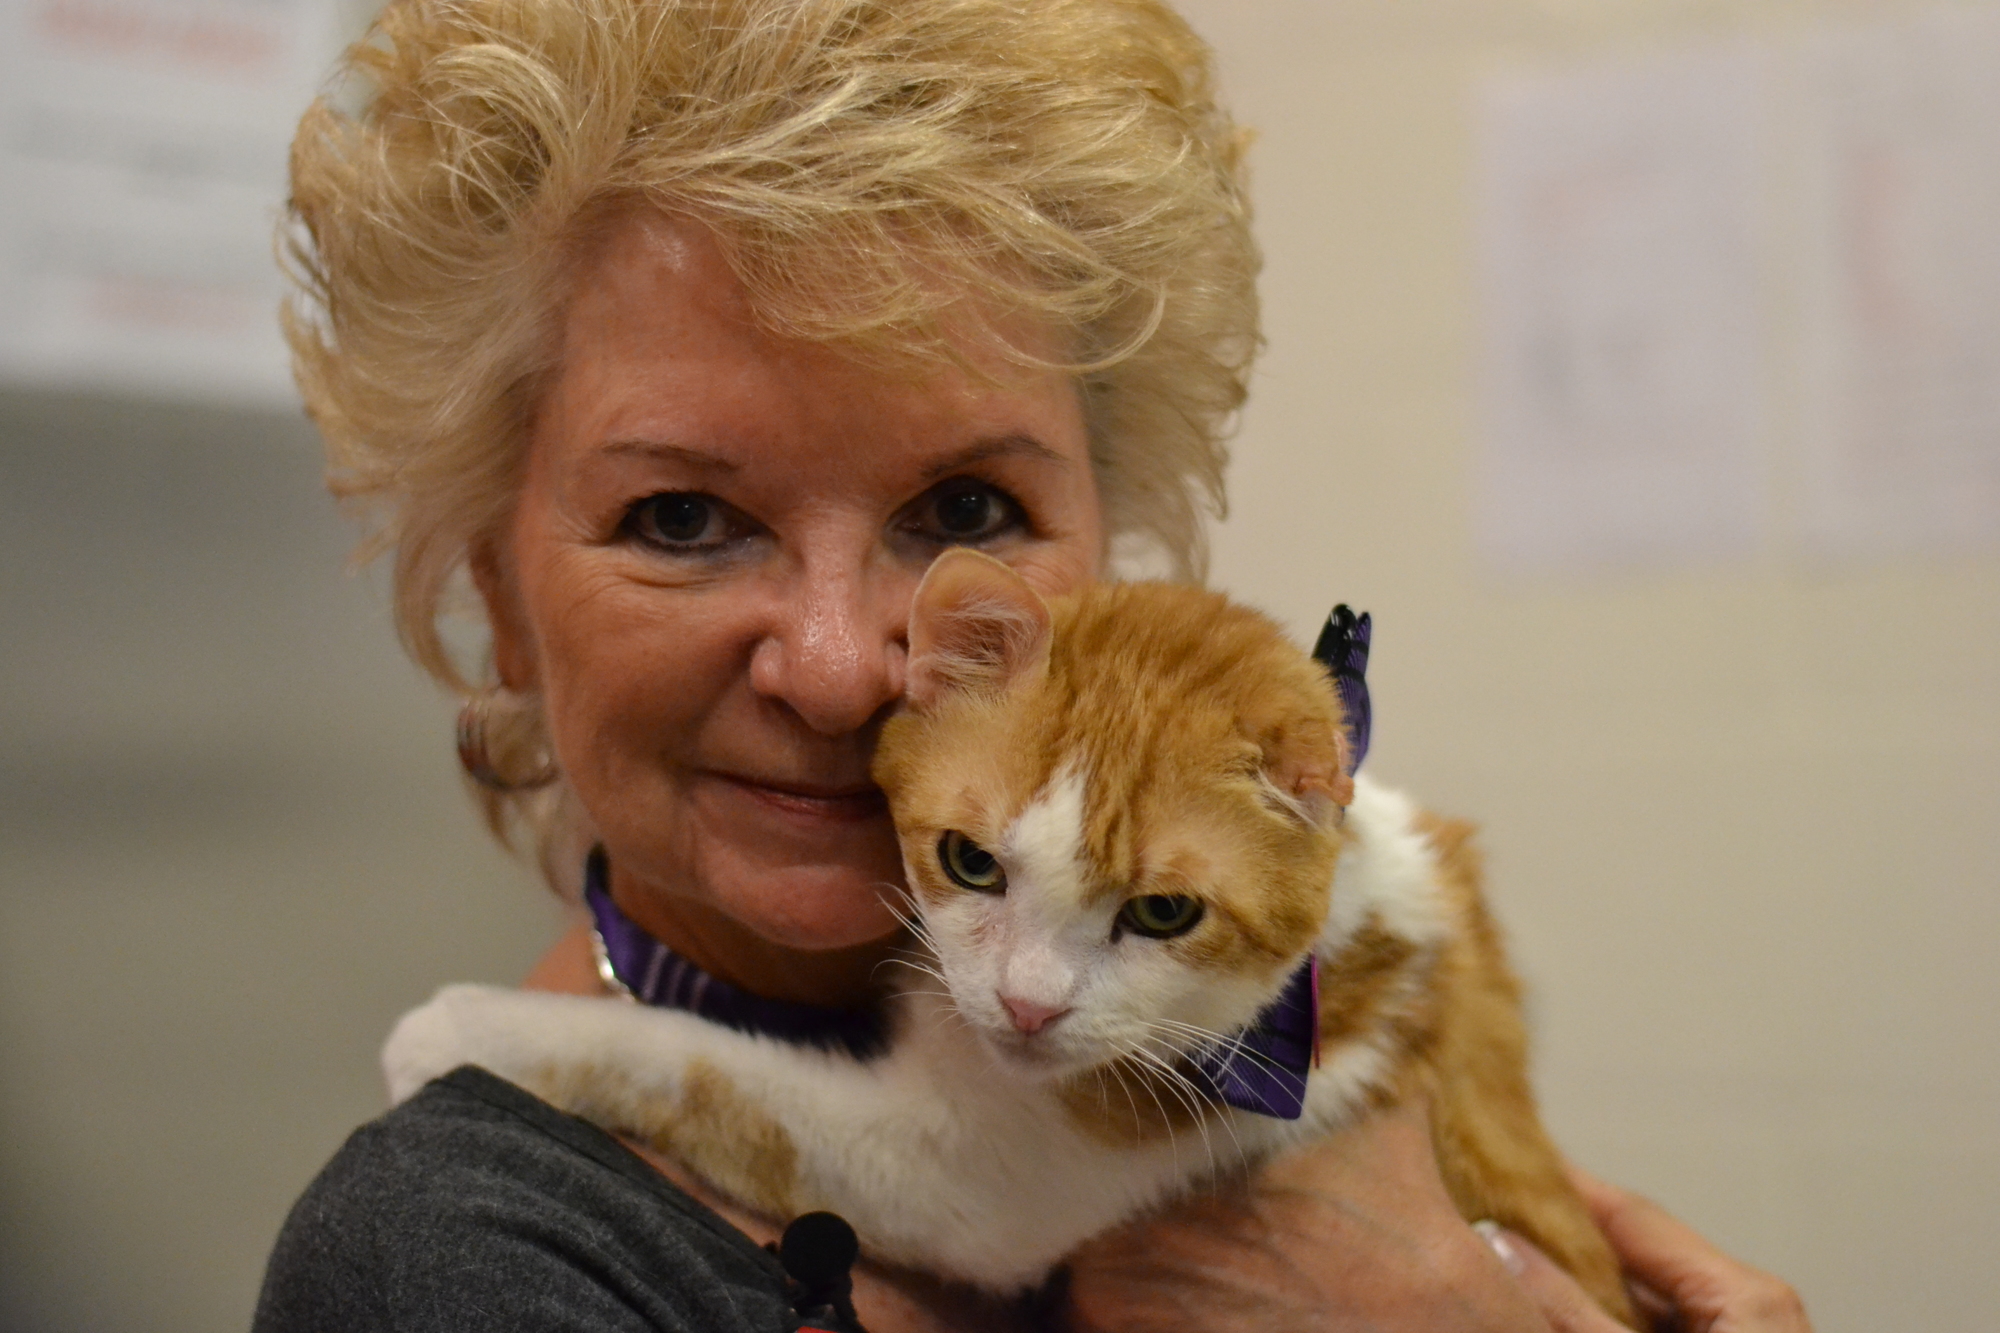 Nancy Colby rehabilitated Bow-Tie after being rescued from a hoarding situation in Charlotte County.